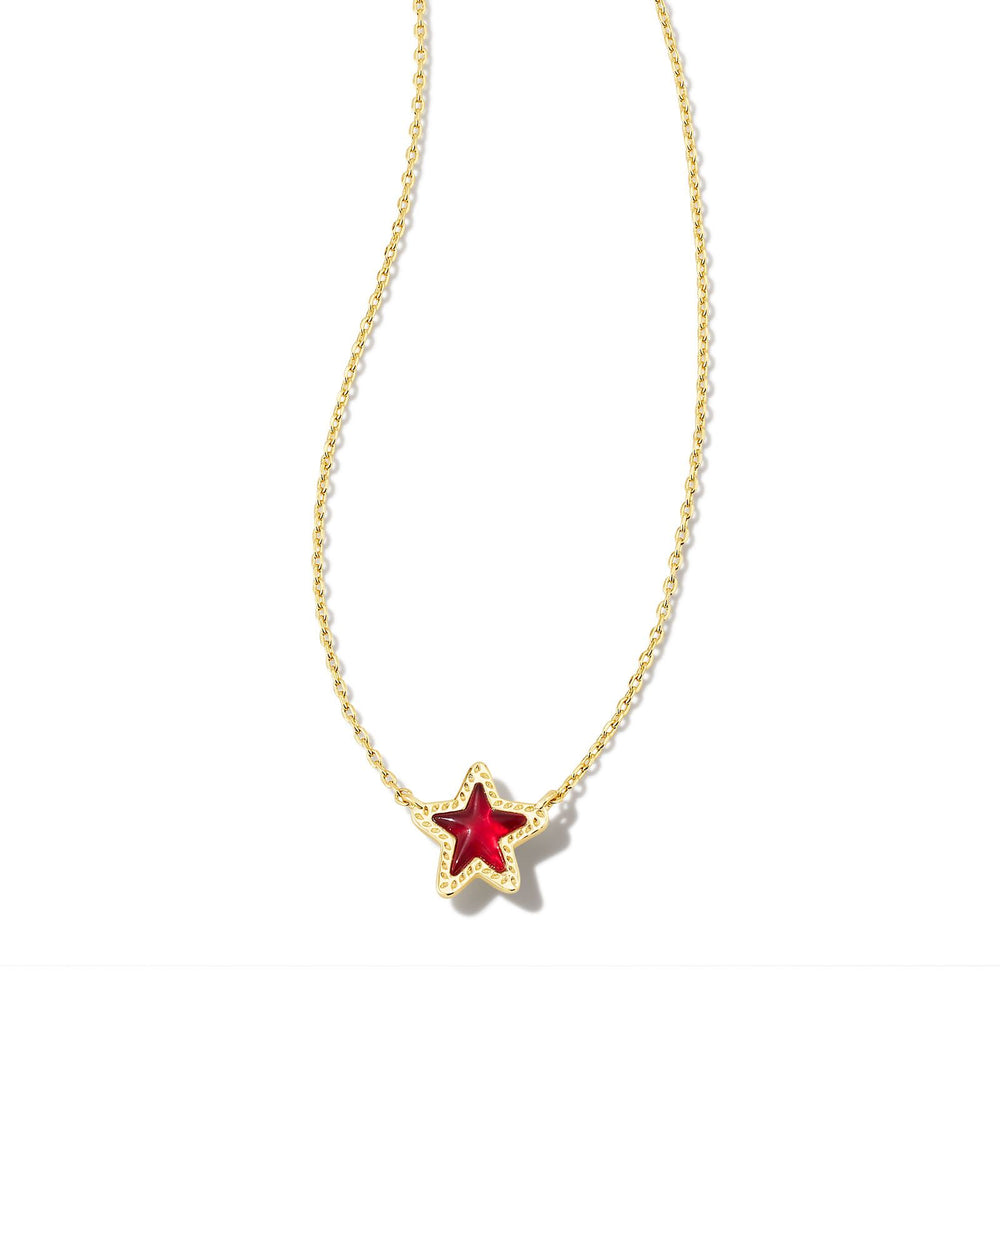 Jae Star Small Gold Pendant Necklace in Cranberry Illusion